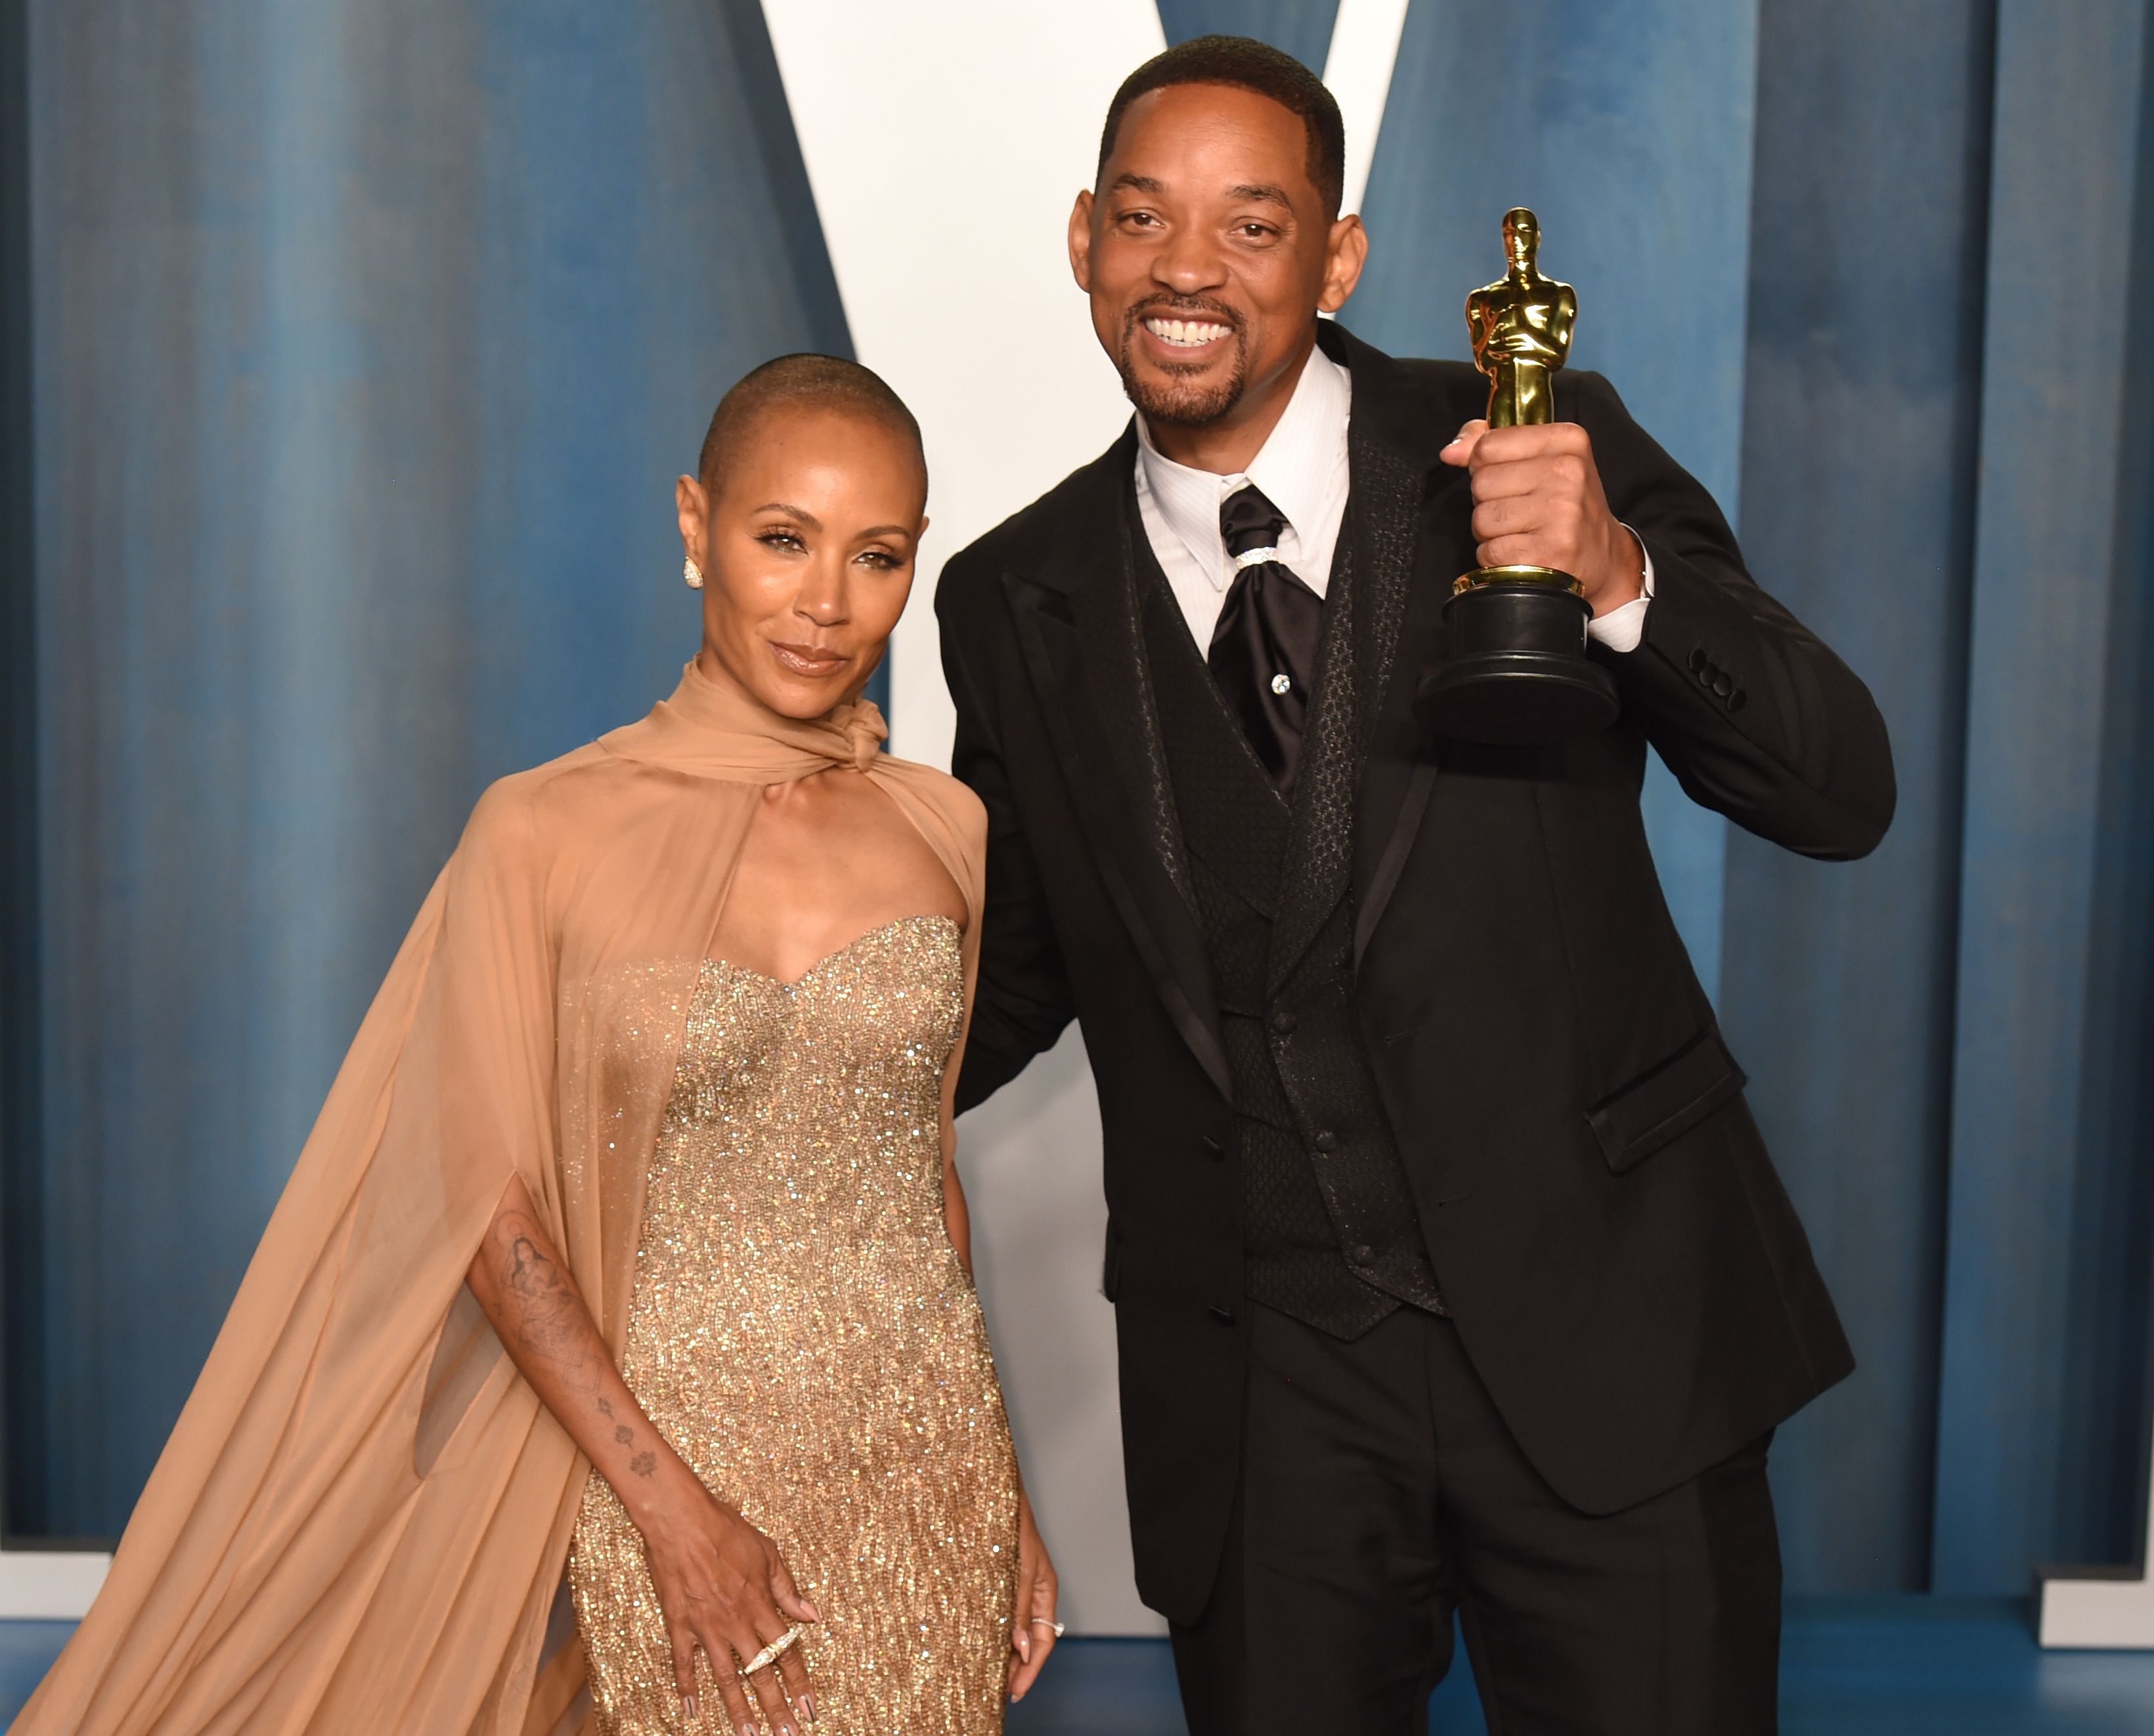 Will Smith and wife Jada Pinkett Smith attending the Vanity Fair Oscar Party held at the Wallis Annenberg Center for the Performing Arts in Beverly Hills, Los Angeles, California